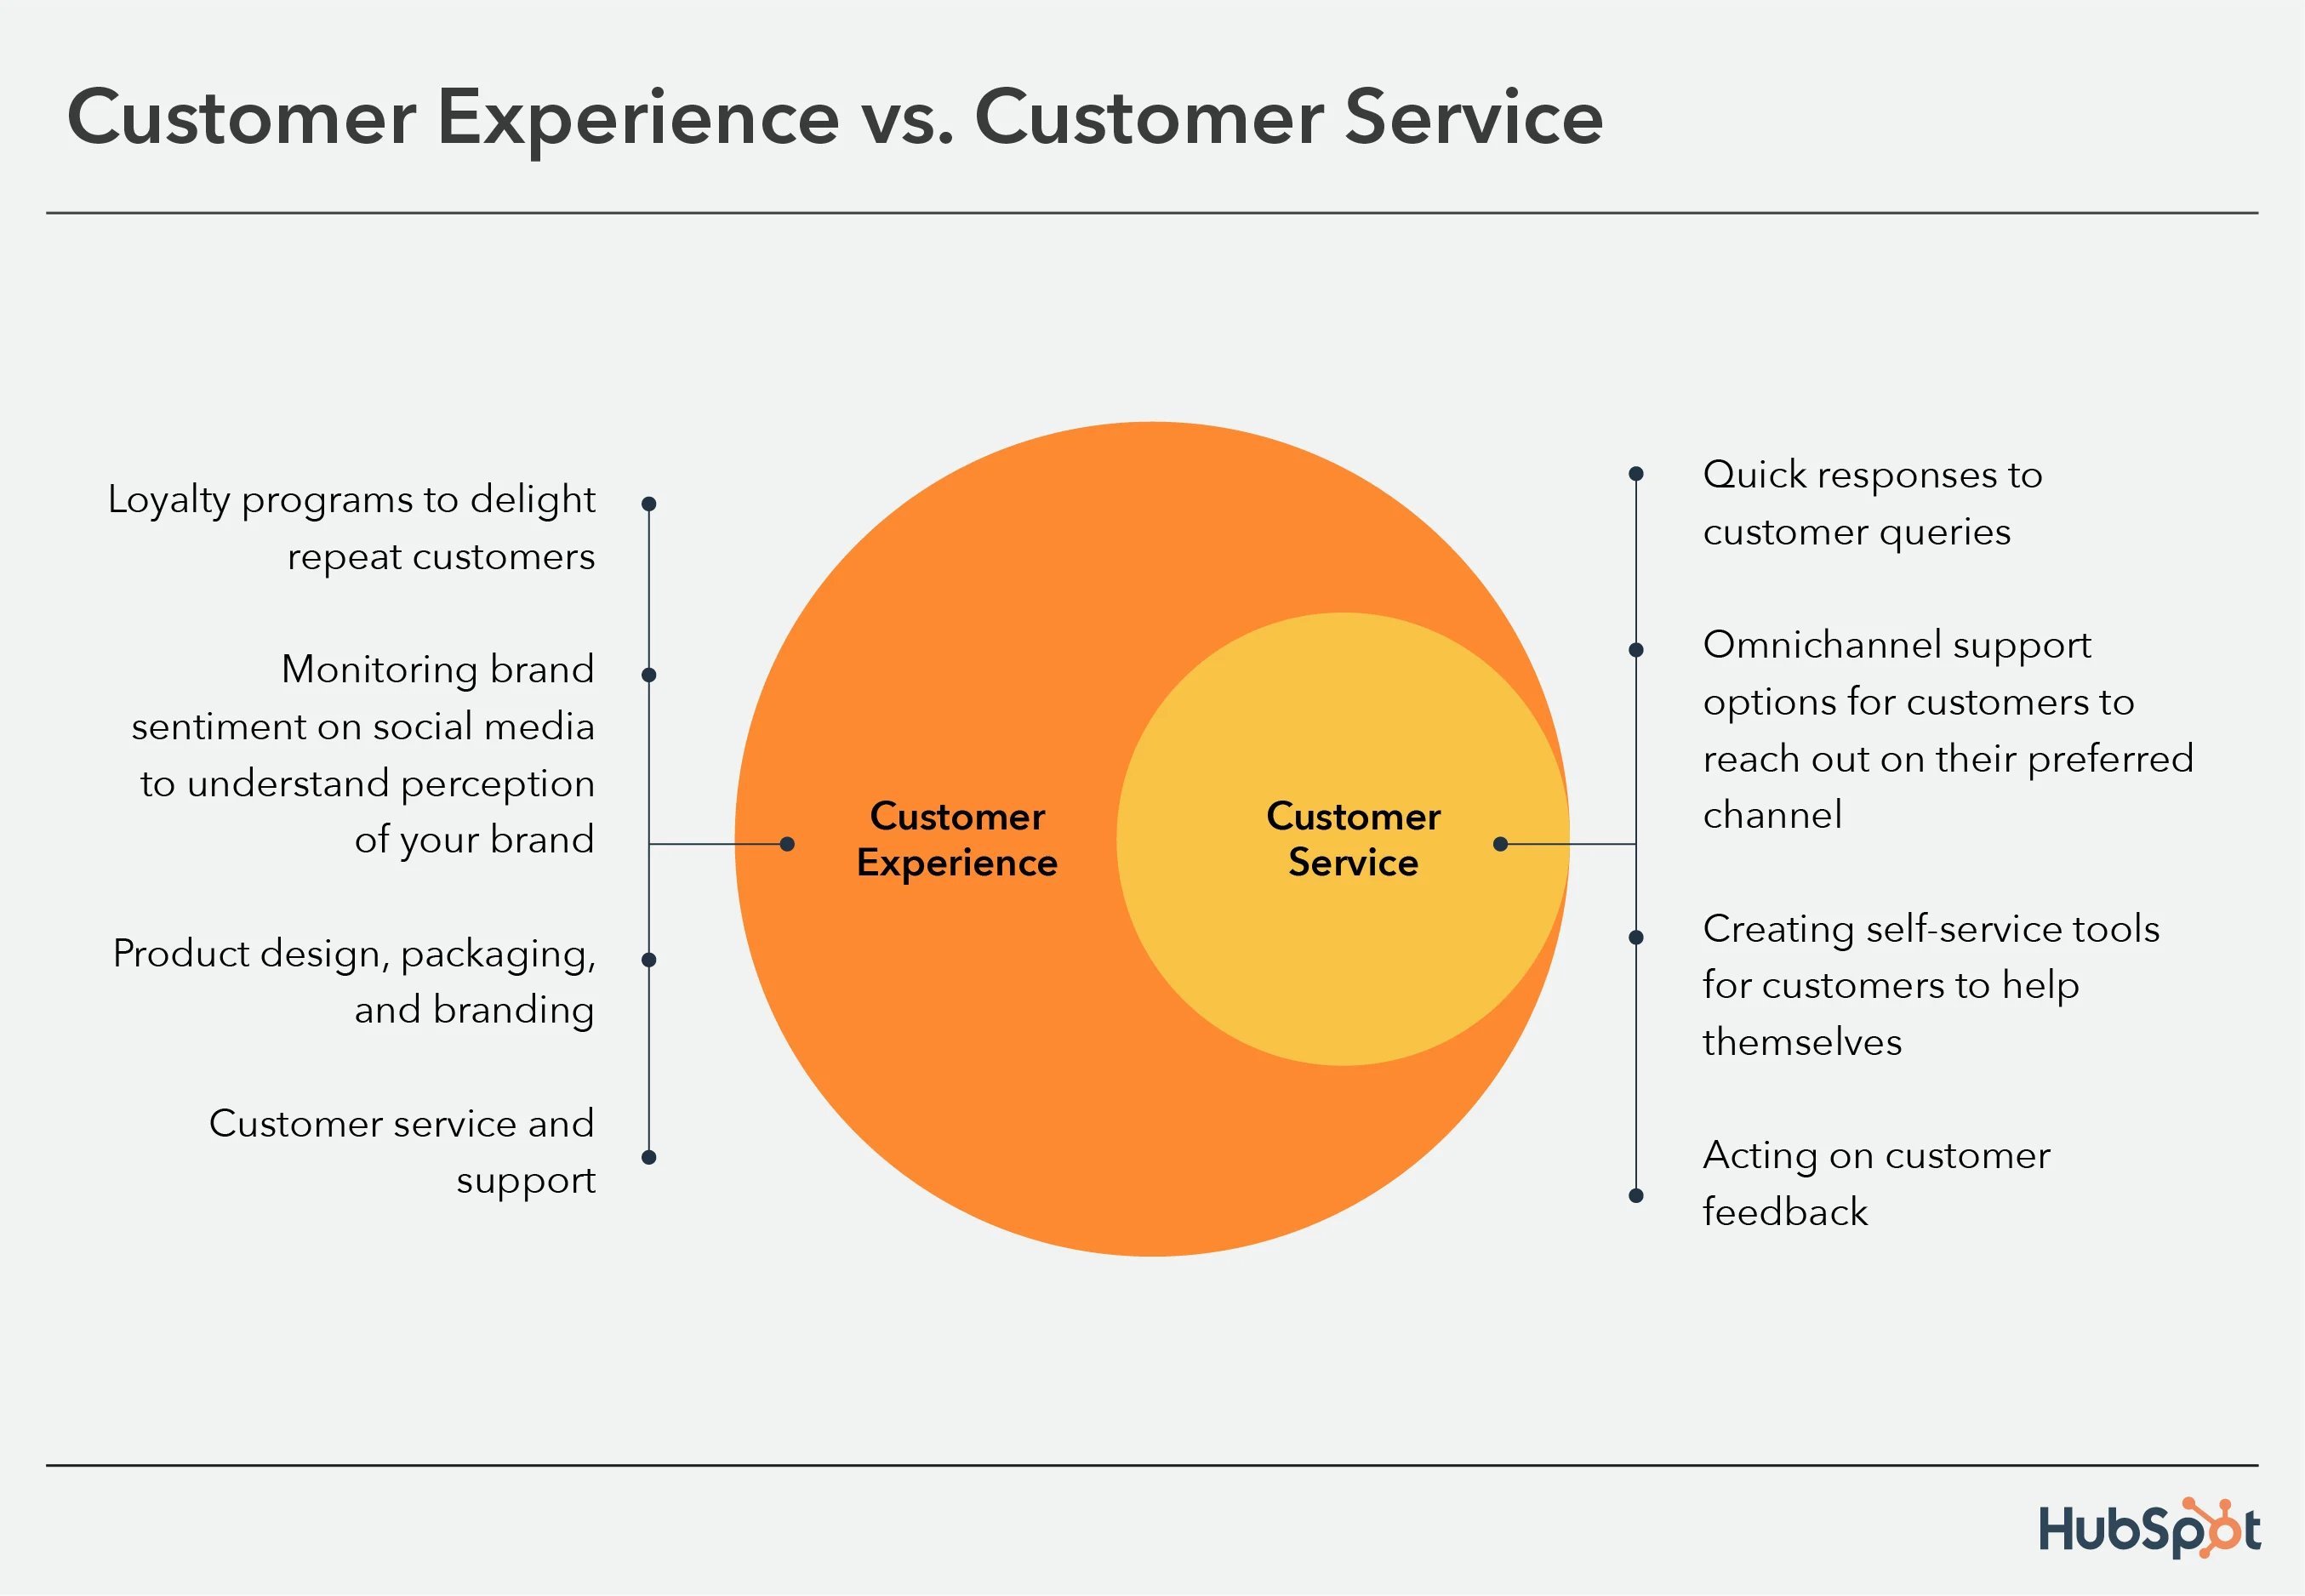 Customer experience: What consumers love, and don't